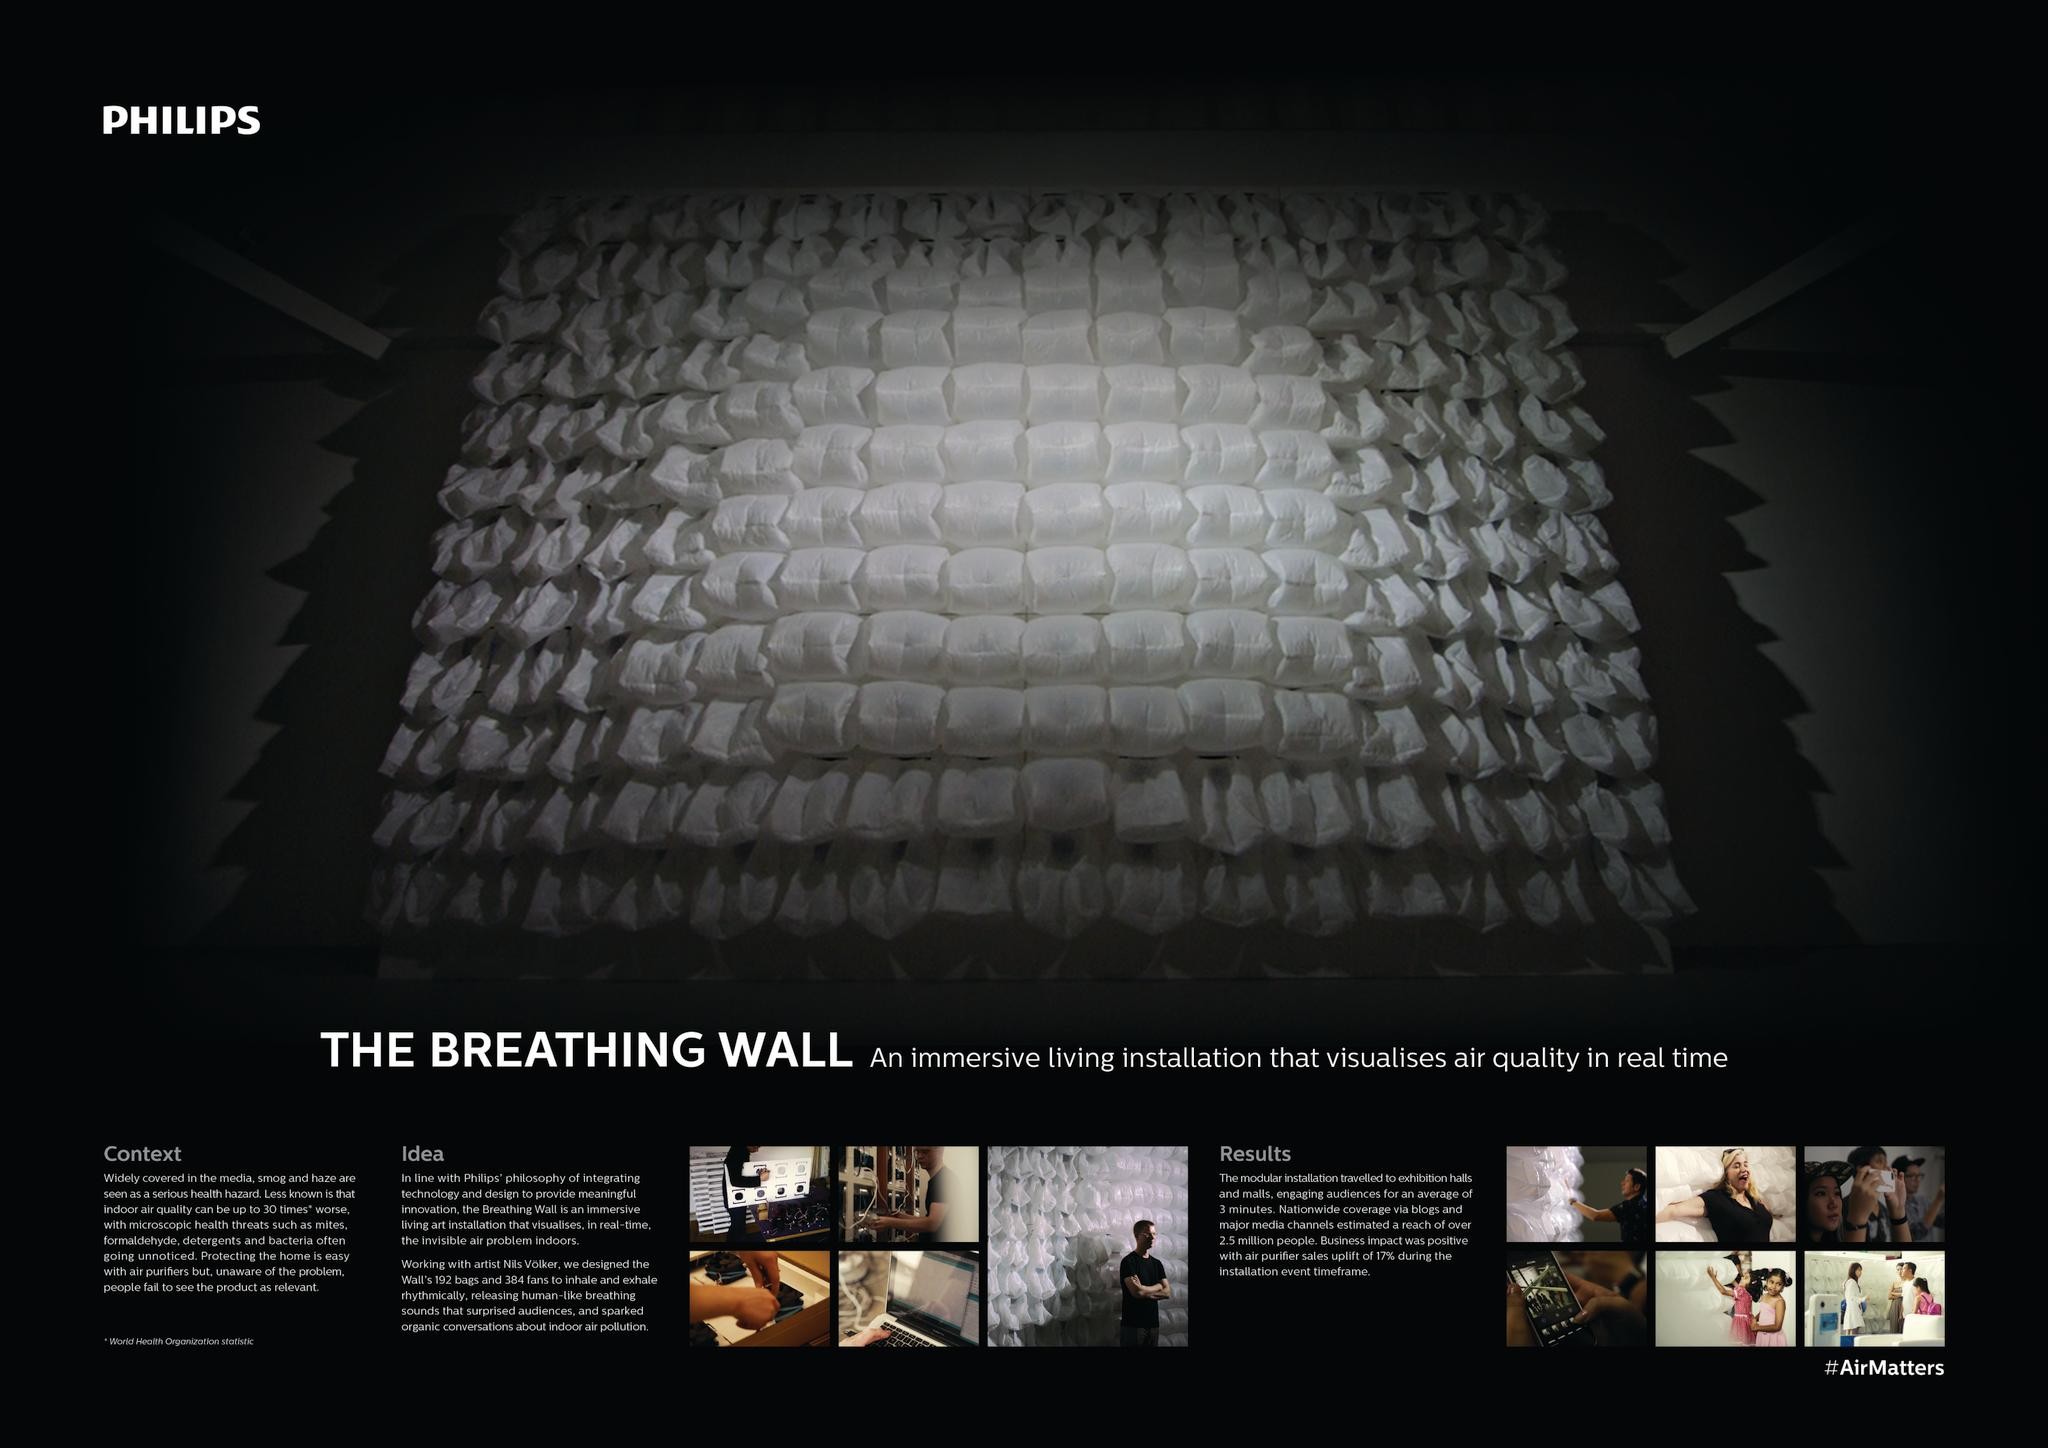 THE BREATHING WALL